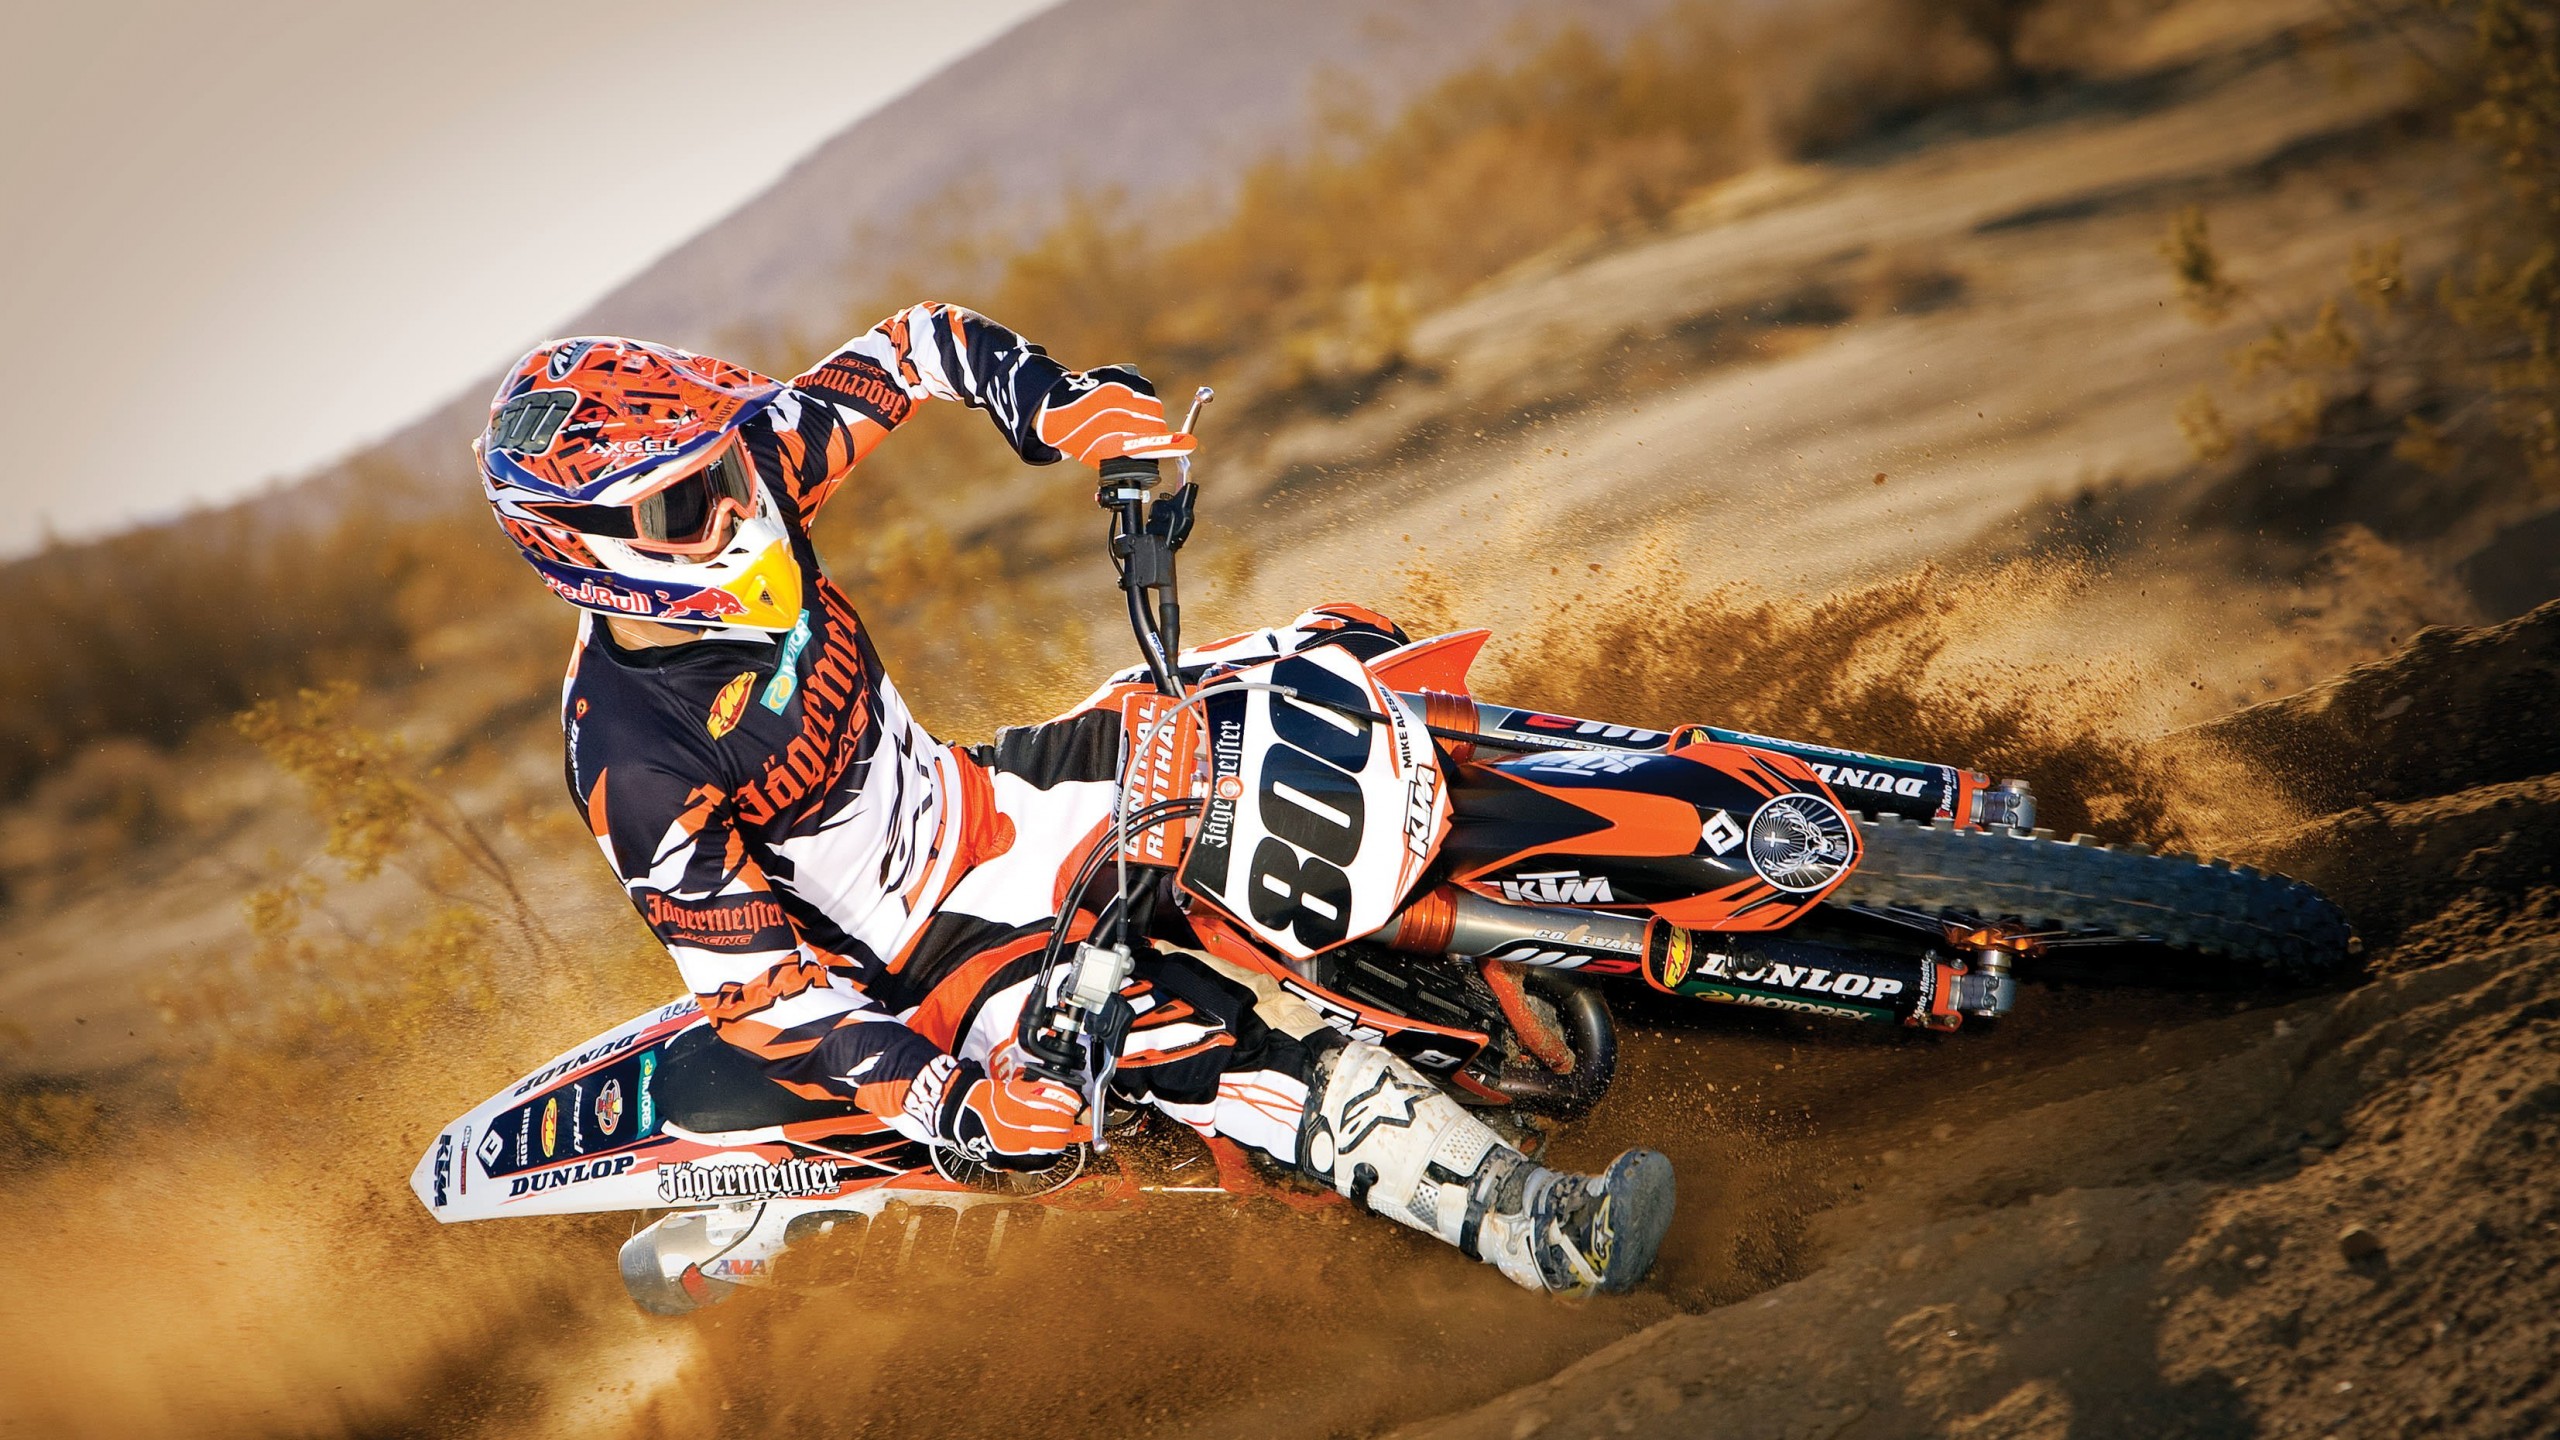 Mike Alessi Wallpaper for Social Media YouTube Channel Art